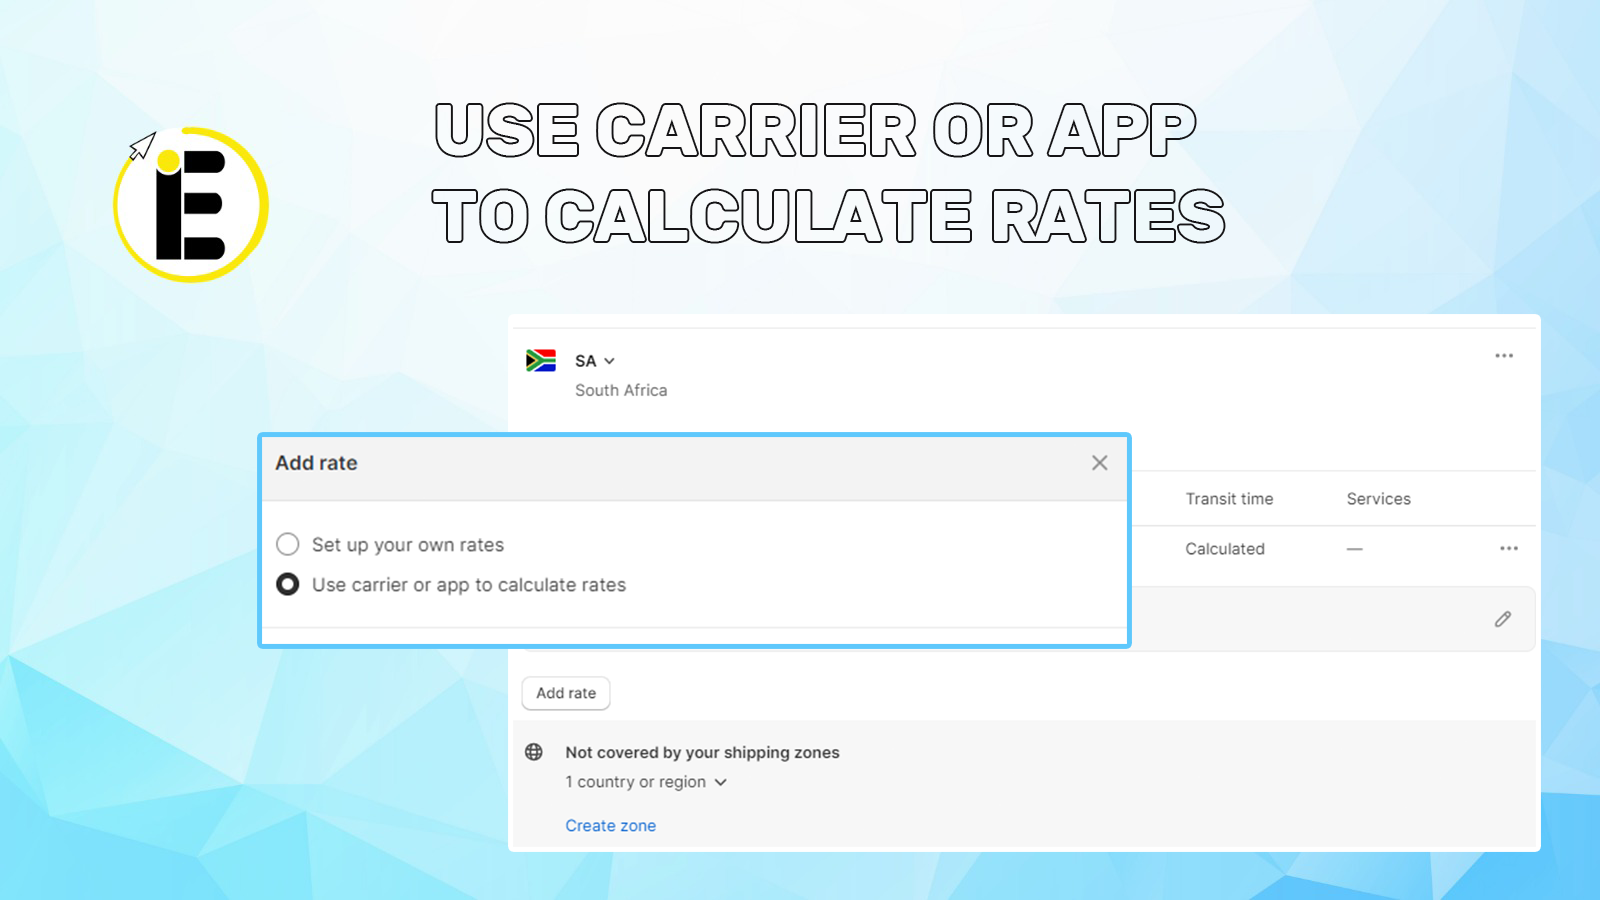 Use carrier or app to calculate rates